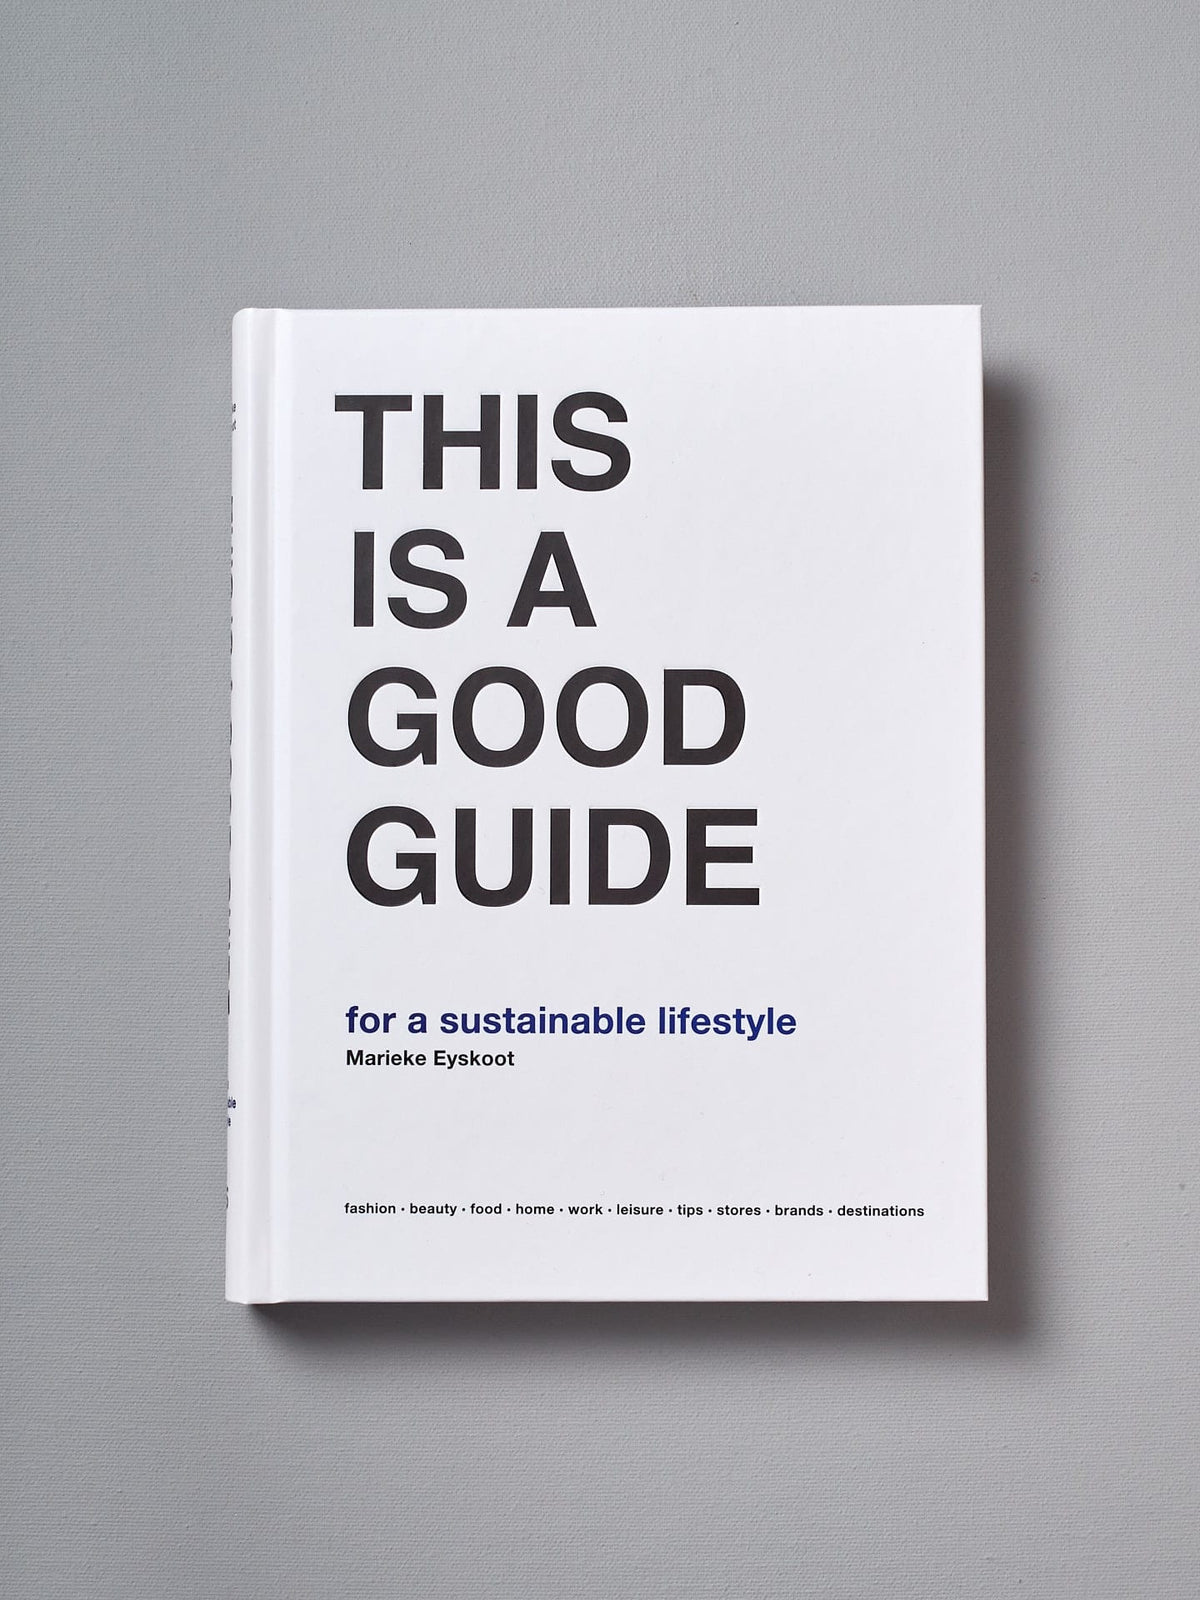 Marieke Eyskoot&#39;s &quot;THIS IS A GOOD GUIDE - for a sustainable lifestyle&quot; is a good guide for a sustainable lifestyle.